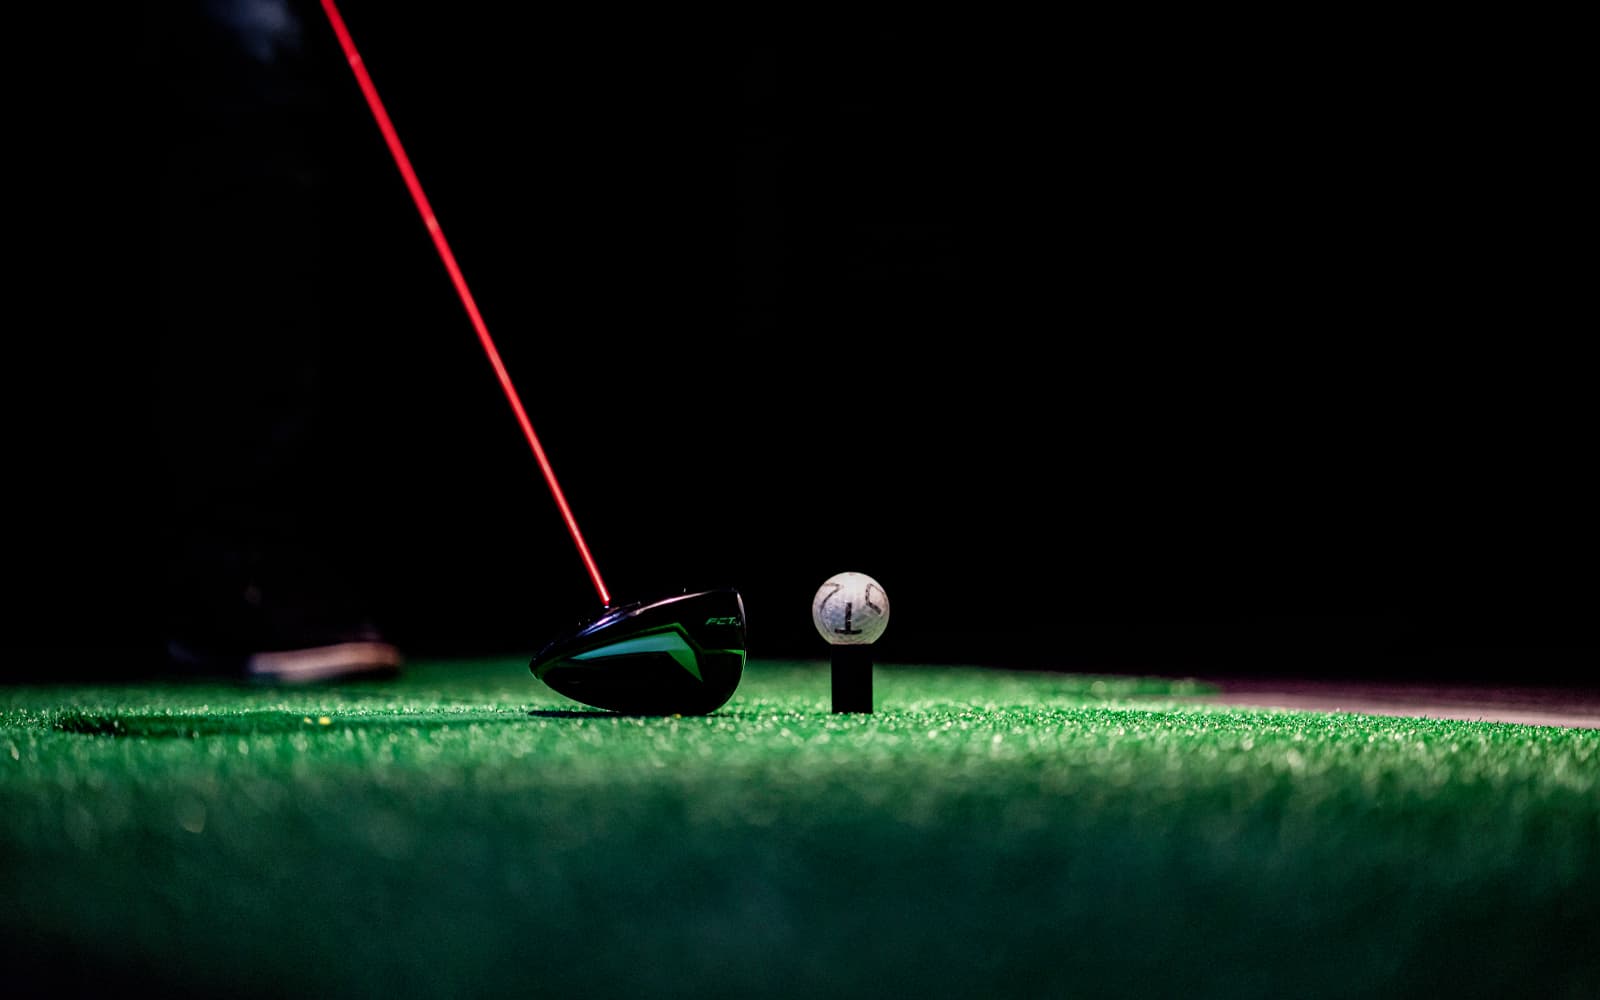 Indoor golf facility X-Golf is coming to Coralville and Cedar Rapids. CREDIT X-GOLF